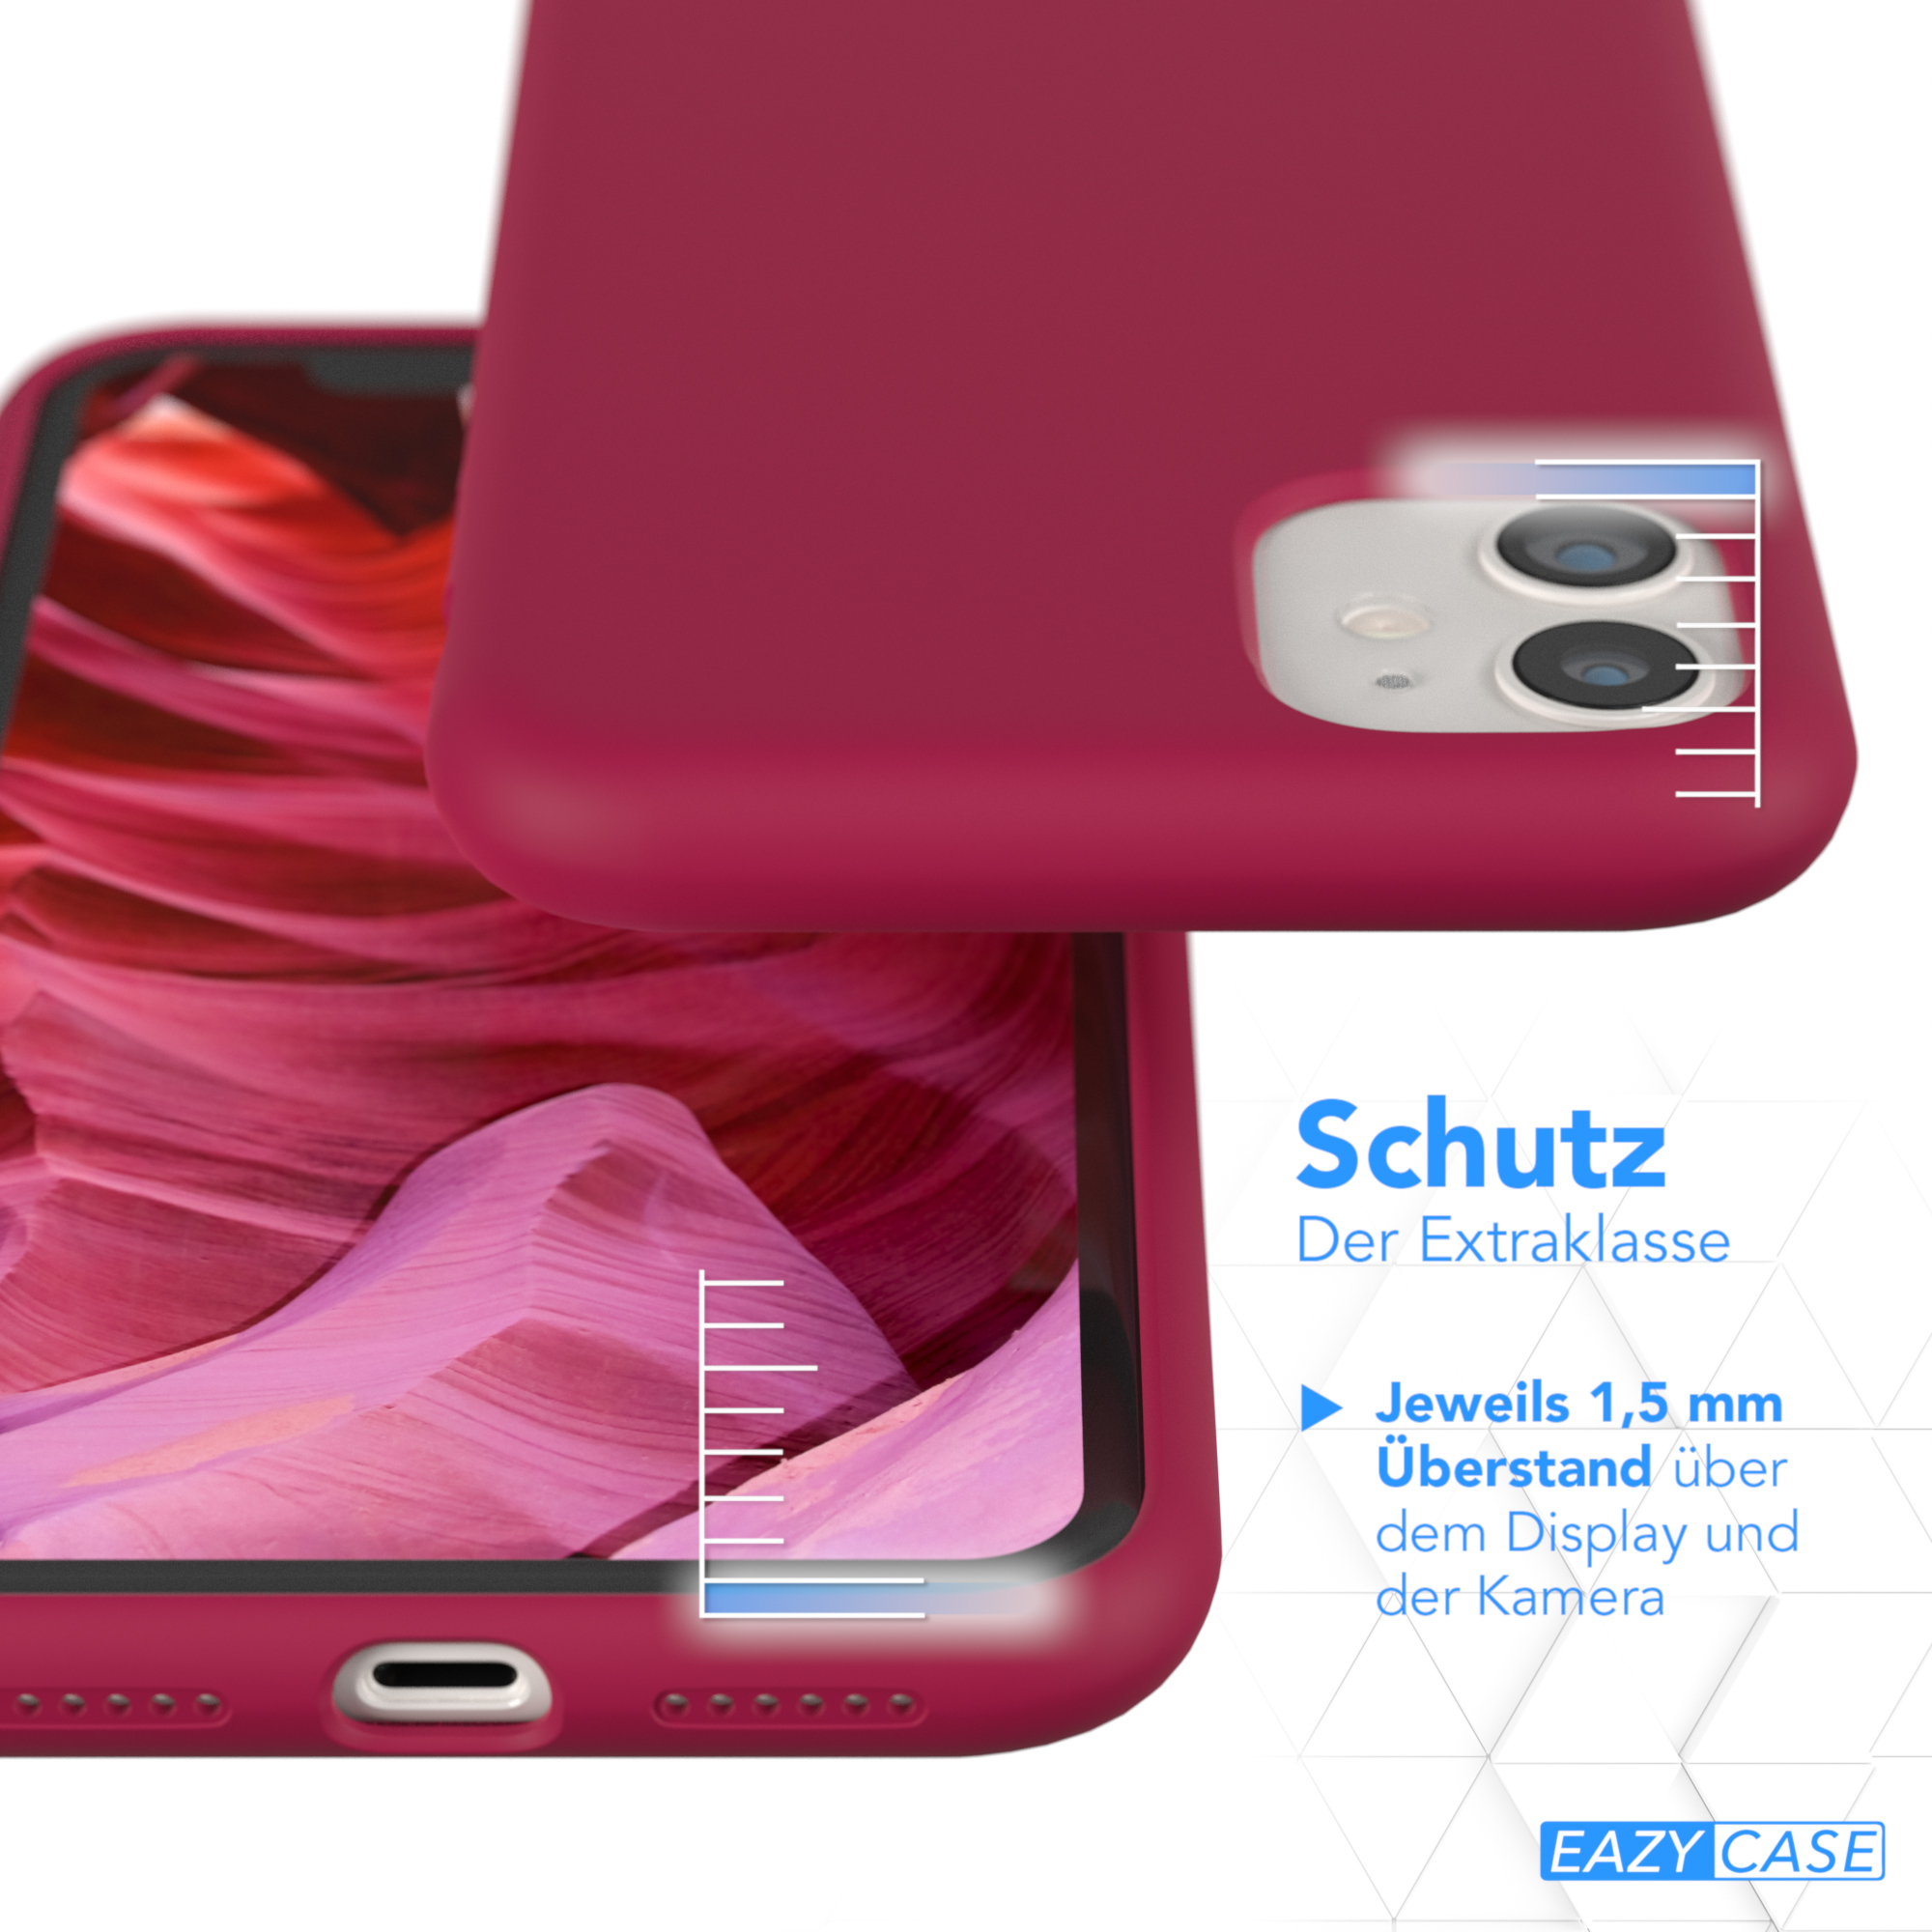 CASE / Apple, EAZY Silikon Handycase, 11, Backcover, Premium Beere Rot iPhone